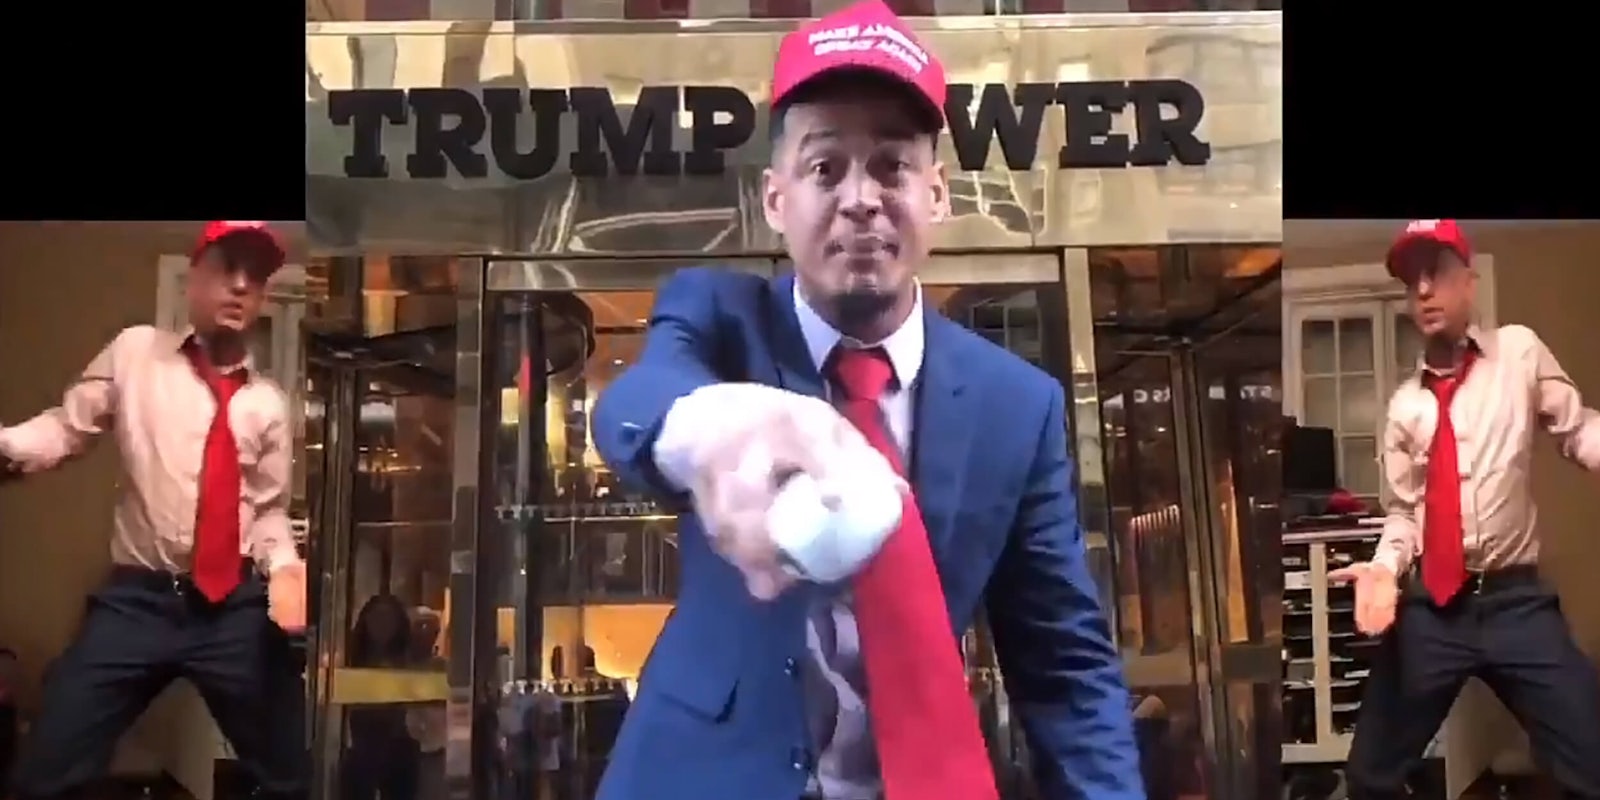 Official DVS 7.0 Maga challenge rap in front of Trump Tower